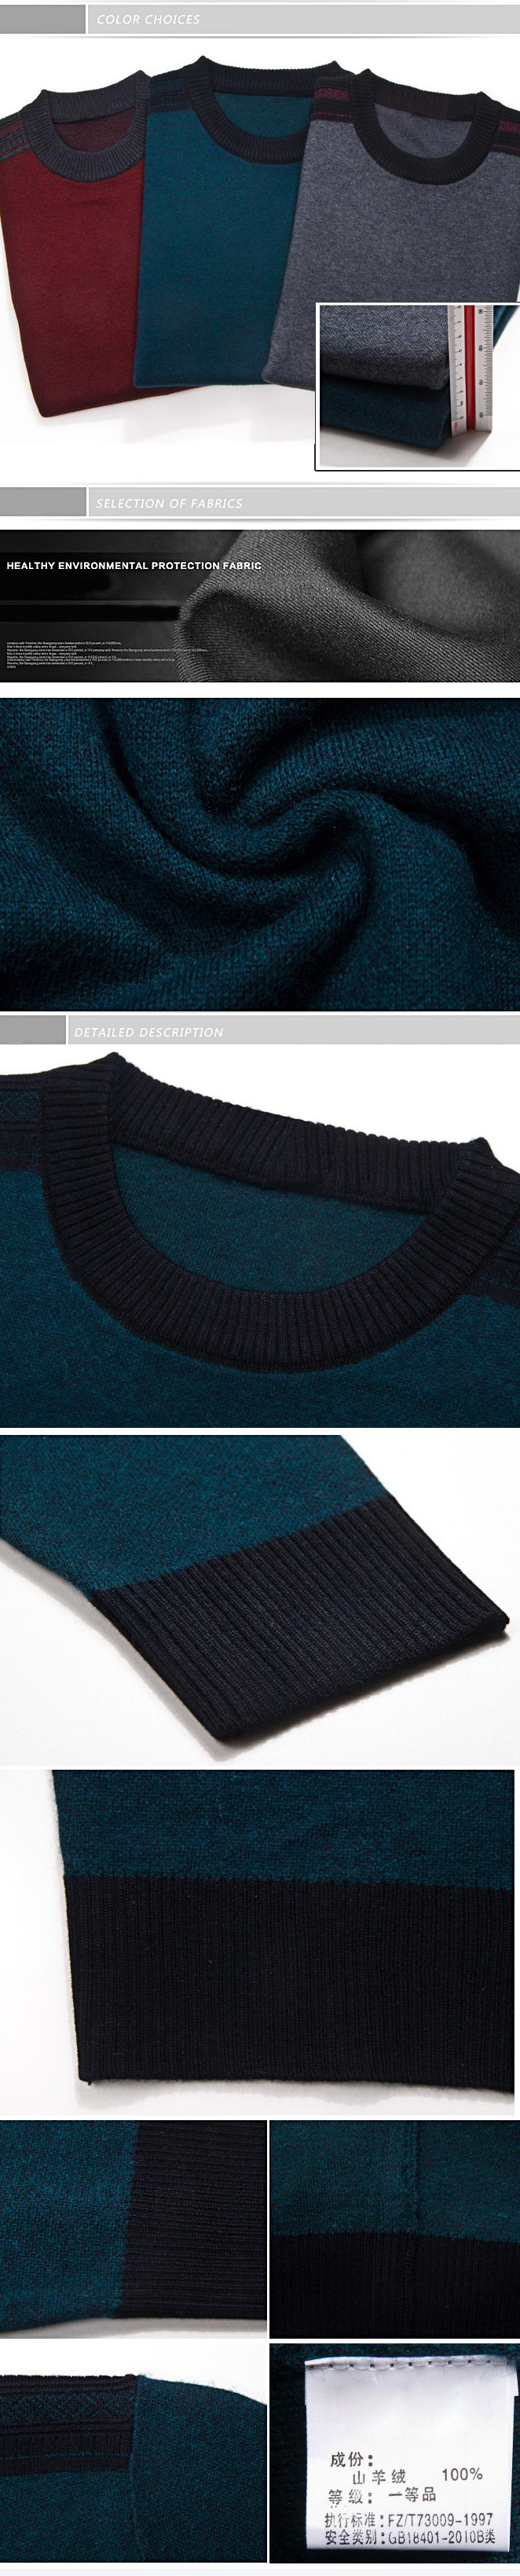 Mens-Fashion-Cashmere-Sweater-Pullovers-Casual-Solid-Colors-Crewneck-Thick-Pullover-1208792